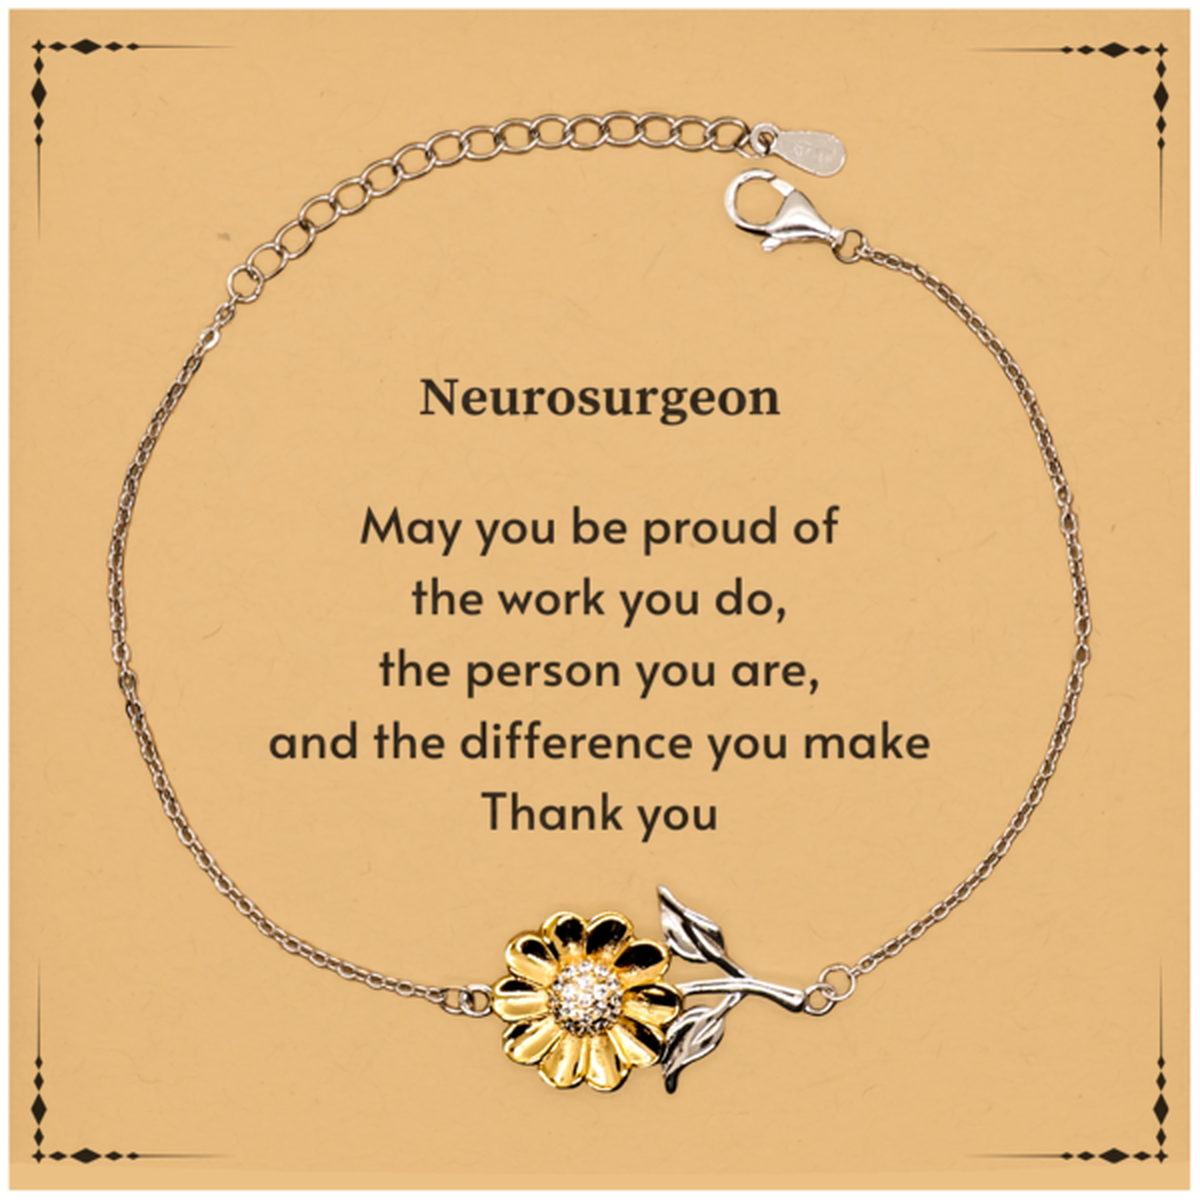 Heartwarming Sunflower Bracelet Retirement Coworkers Gifts for Neurosurgeon, Neurosurgeon May You be proud of the work you do, the person you are Gifts for Boss Men Women Friends